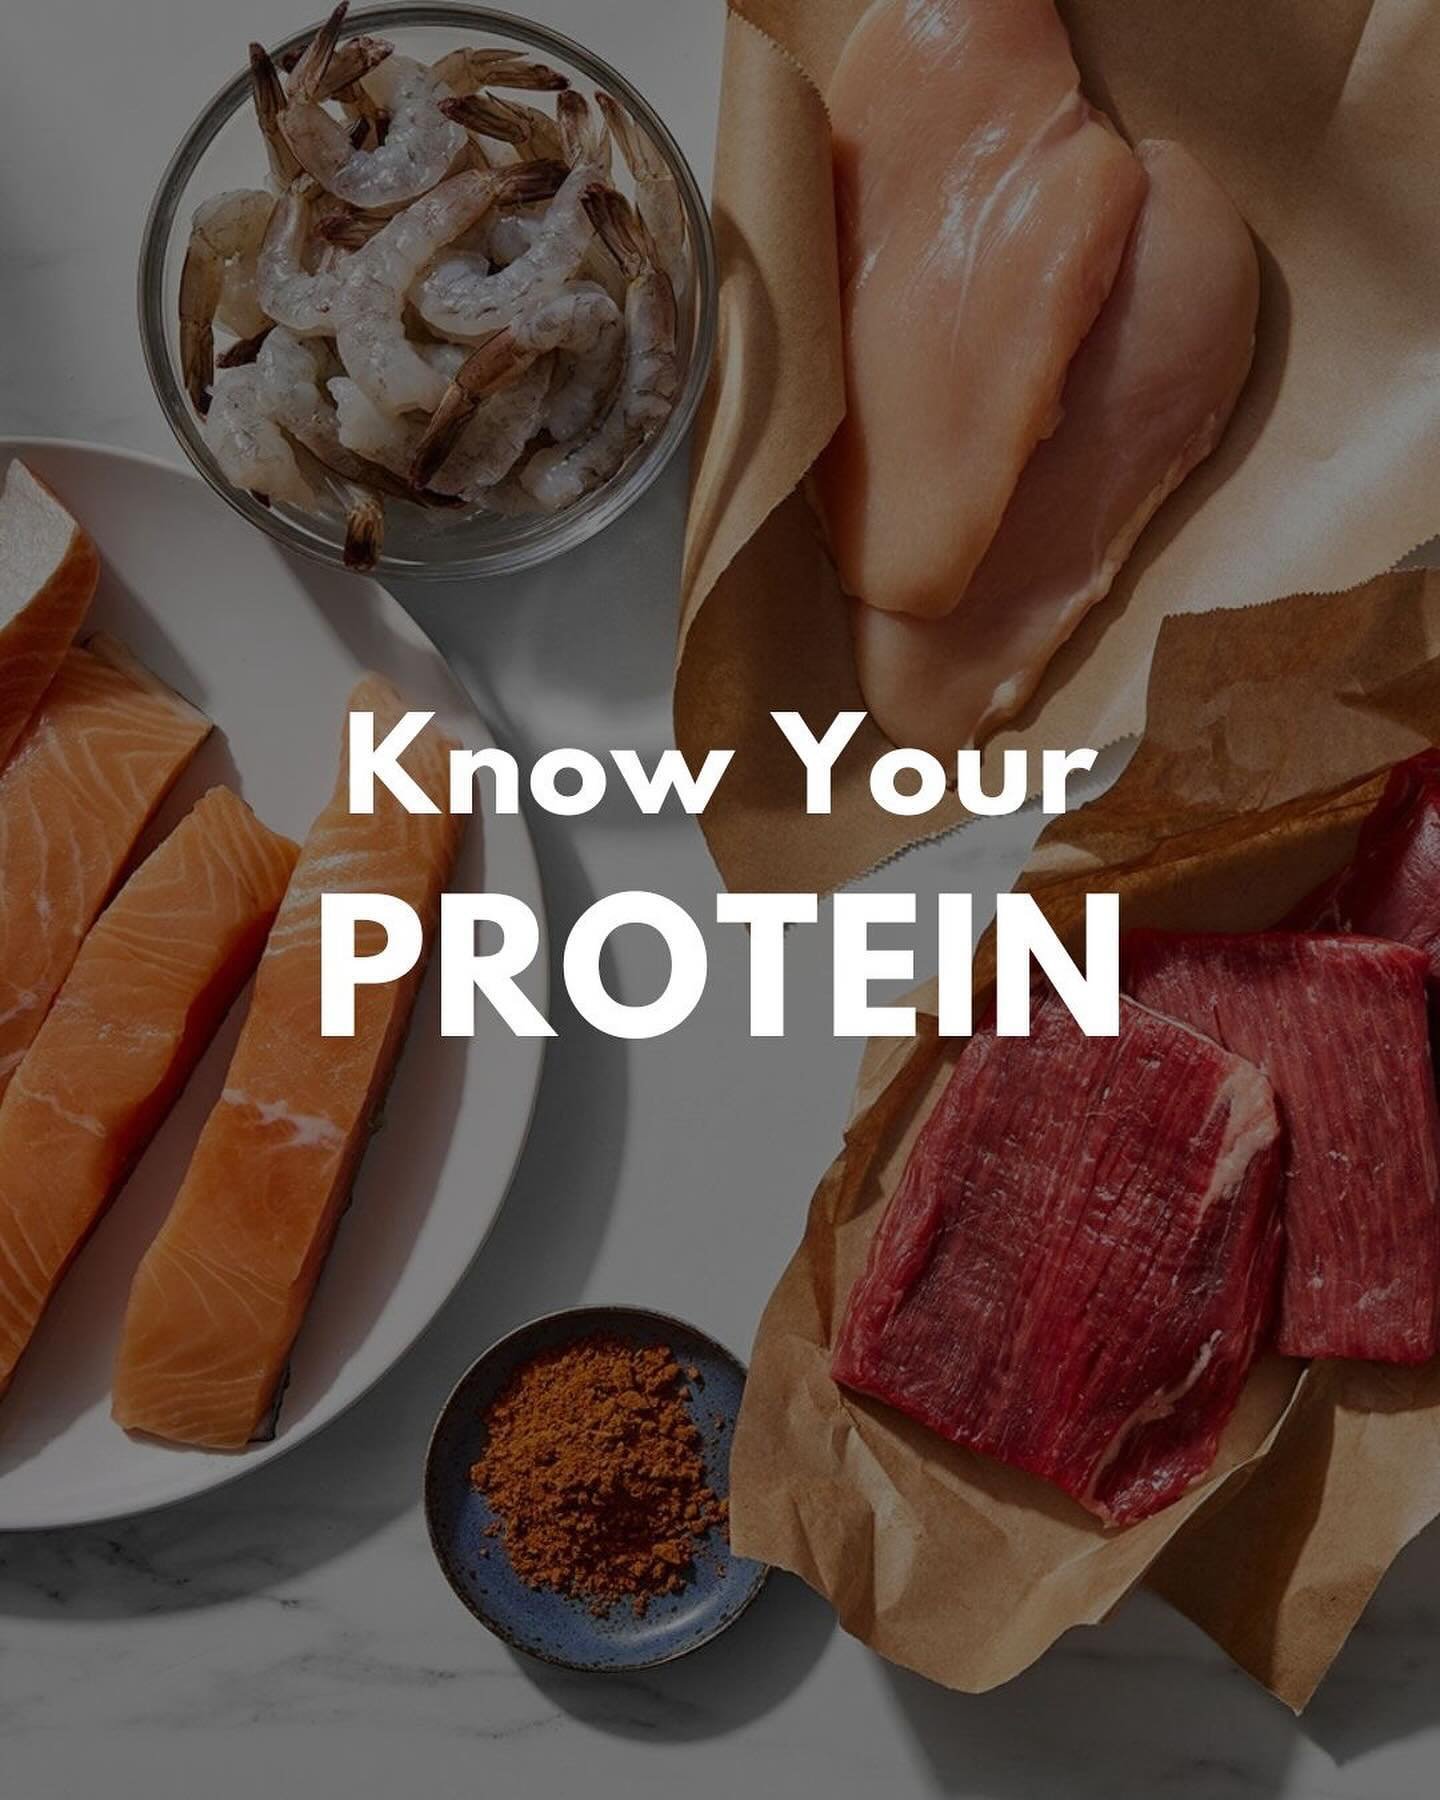 PROTEIN POWER

At Unrefined, we prioritize protein in all our meals because your health is our number 1 priority and we believe in fueling your body for optimal performance! 

Protein helps build and repair muscles, keeps you full and satisfied, and 